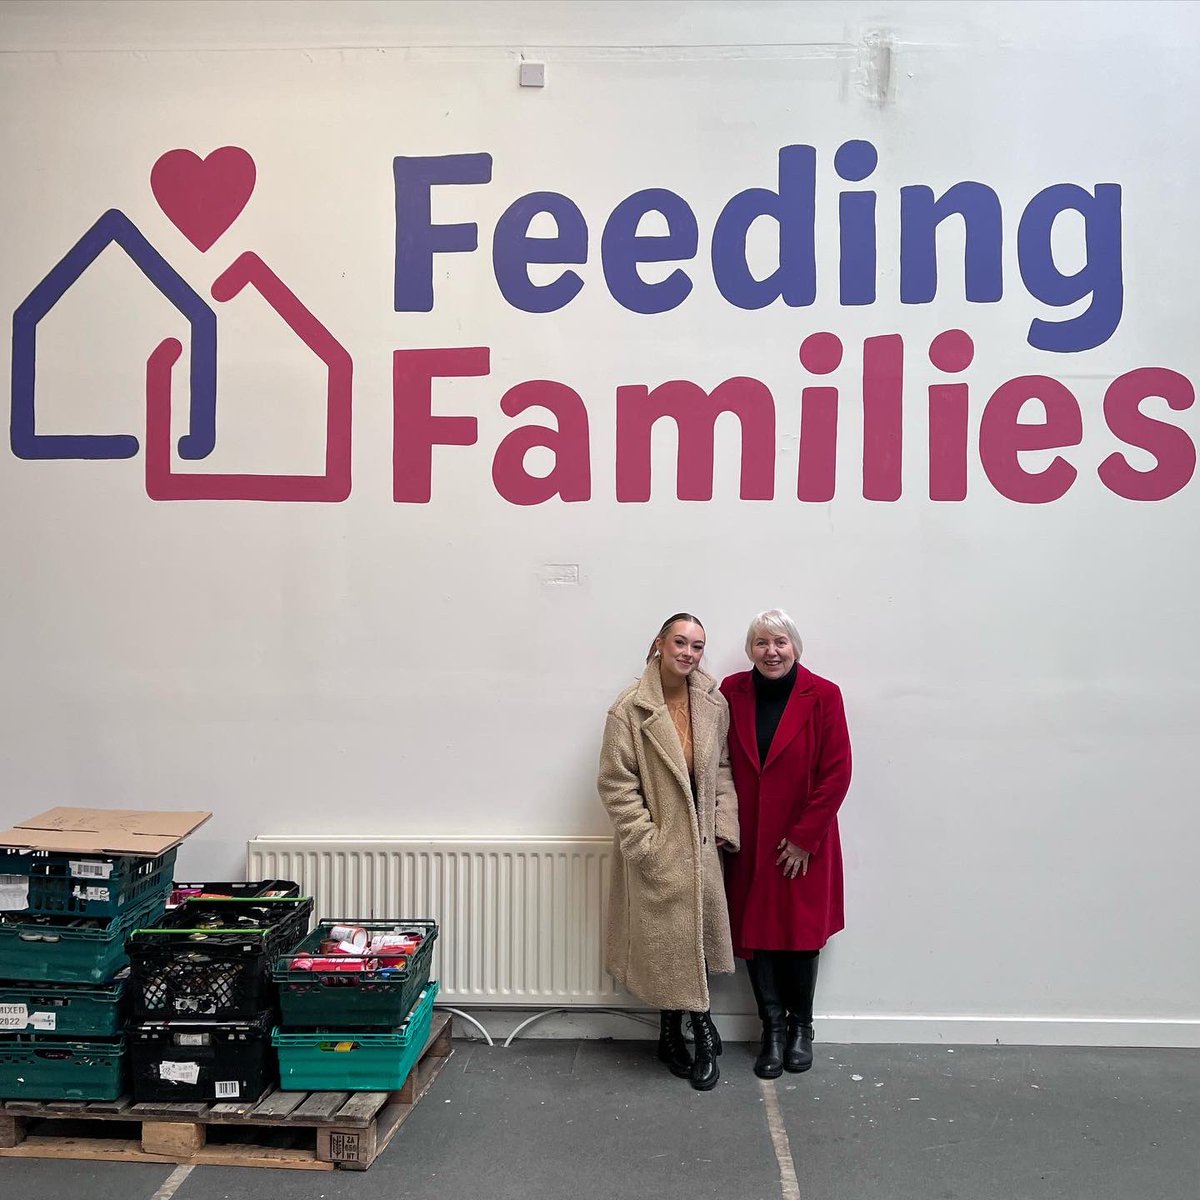 Tune into @BBCNEandCumbria at 6:30pm where we introduce the Christmas project & tell Erin's story of what Feeding Families means to her. (Spoiler alert - she's amazing!) AND we are discussing the rise in the food poverty crisis on the main @BBCNews at 6pm